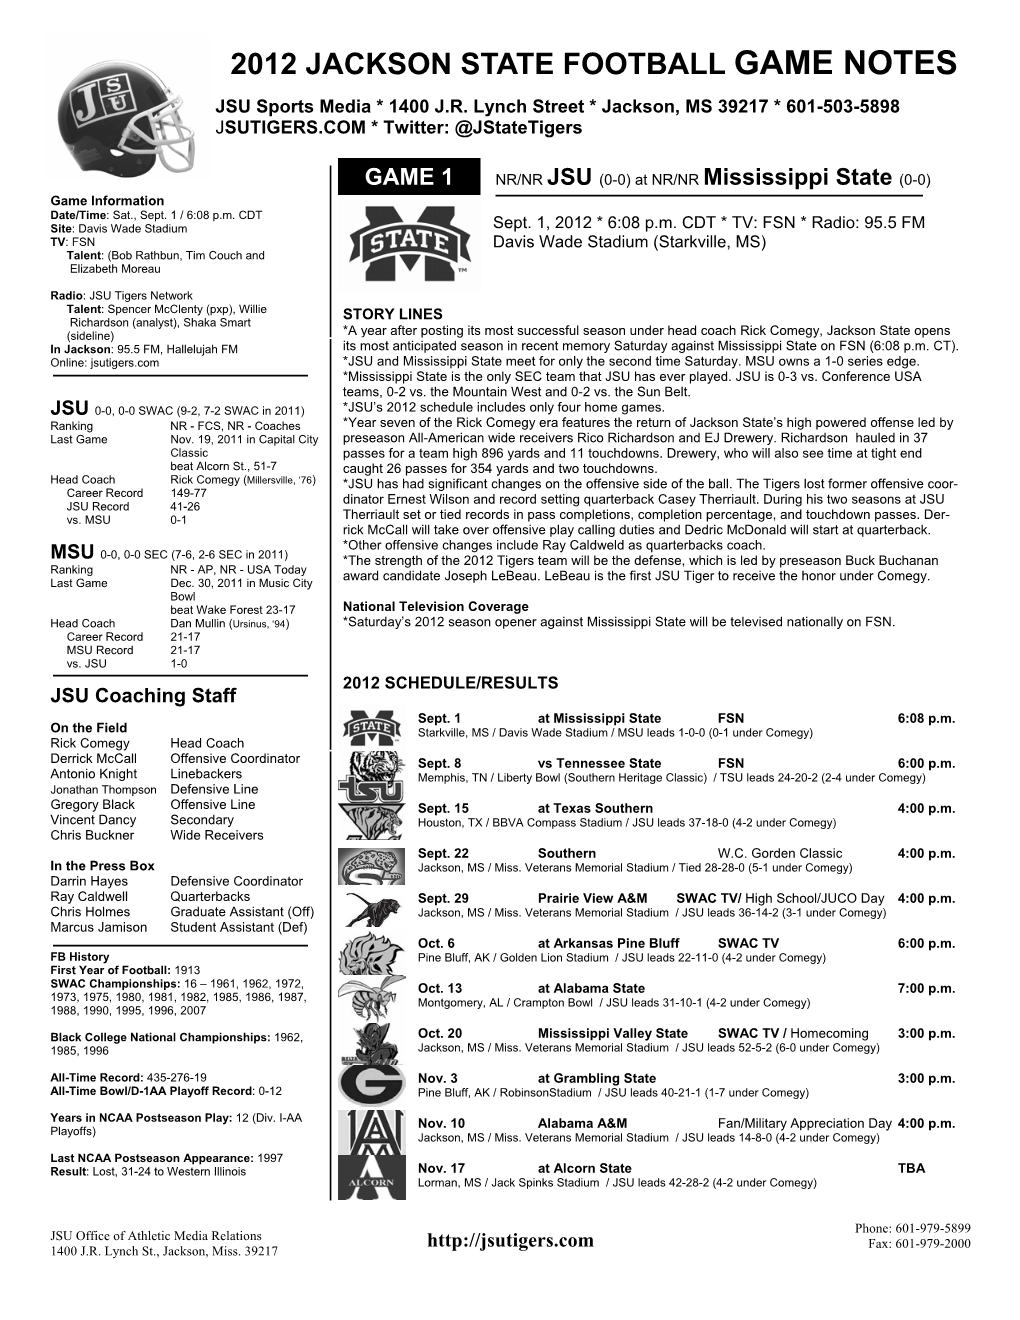 2012 FB Game Notes